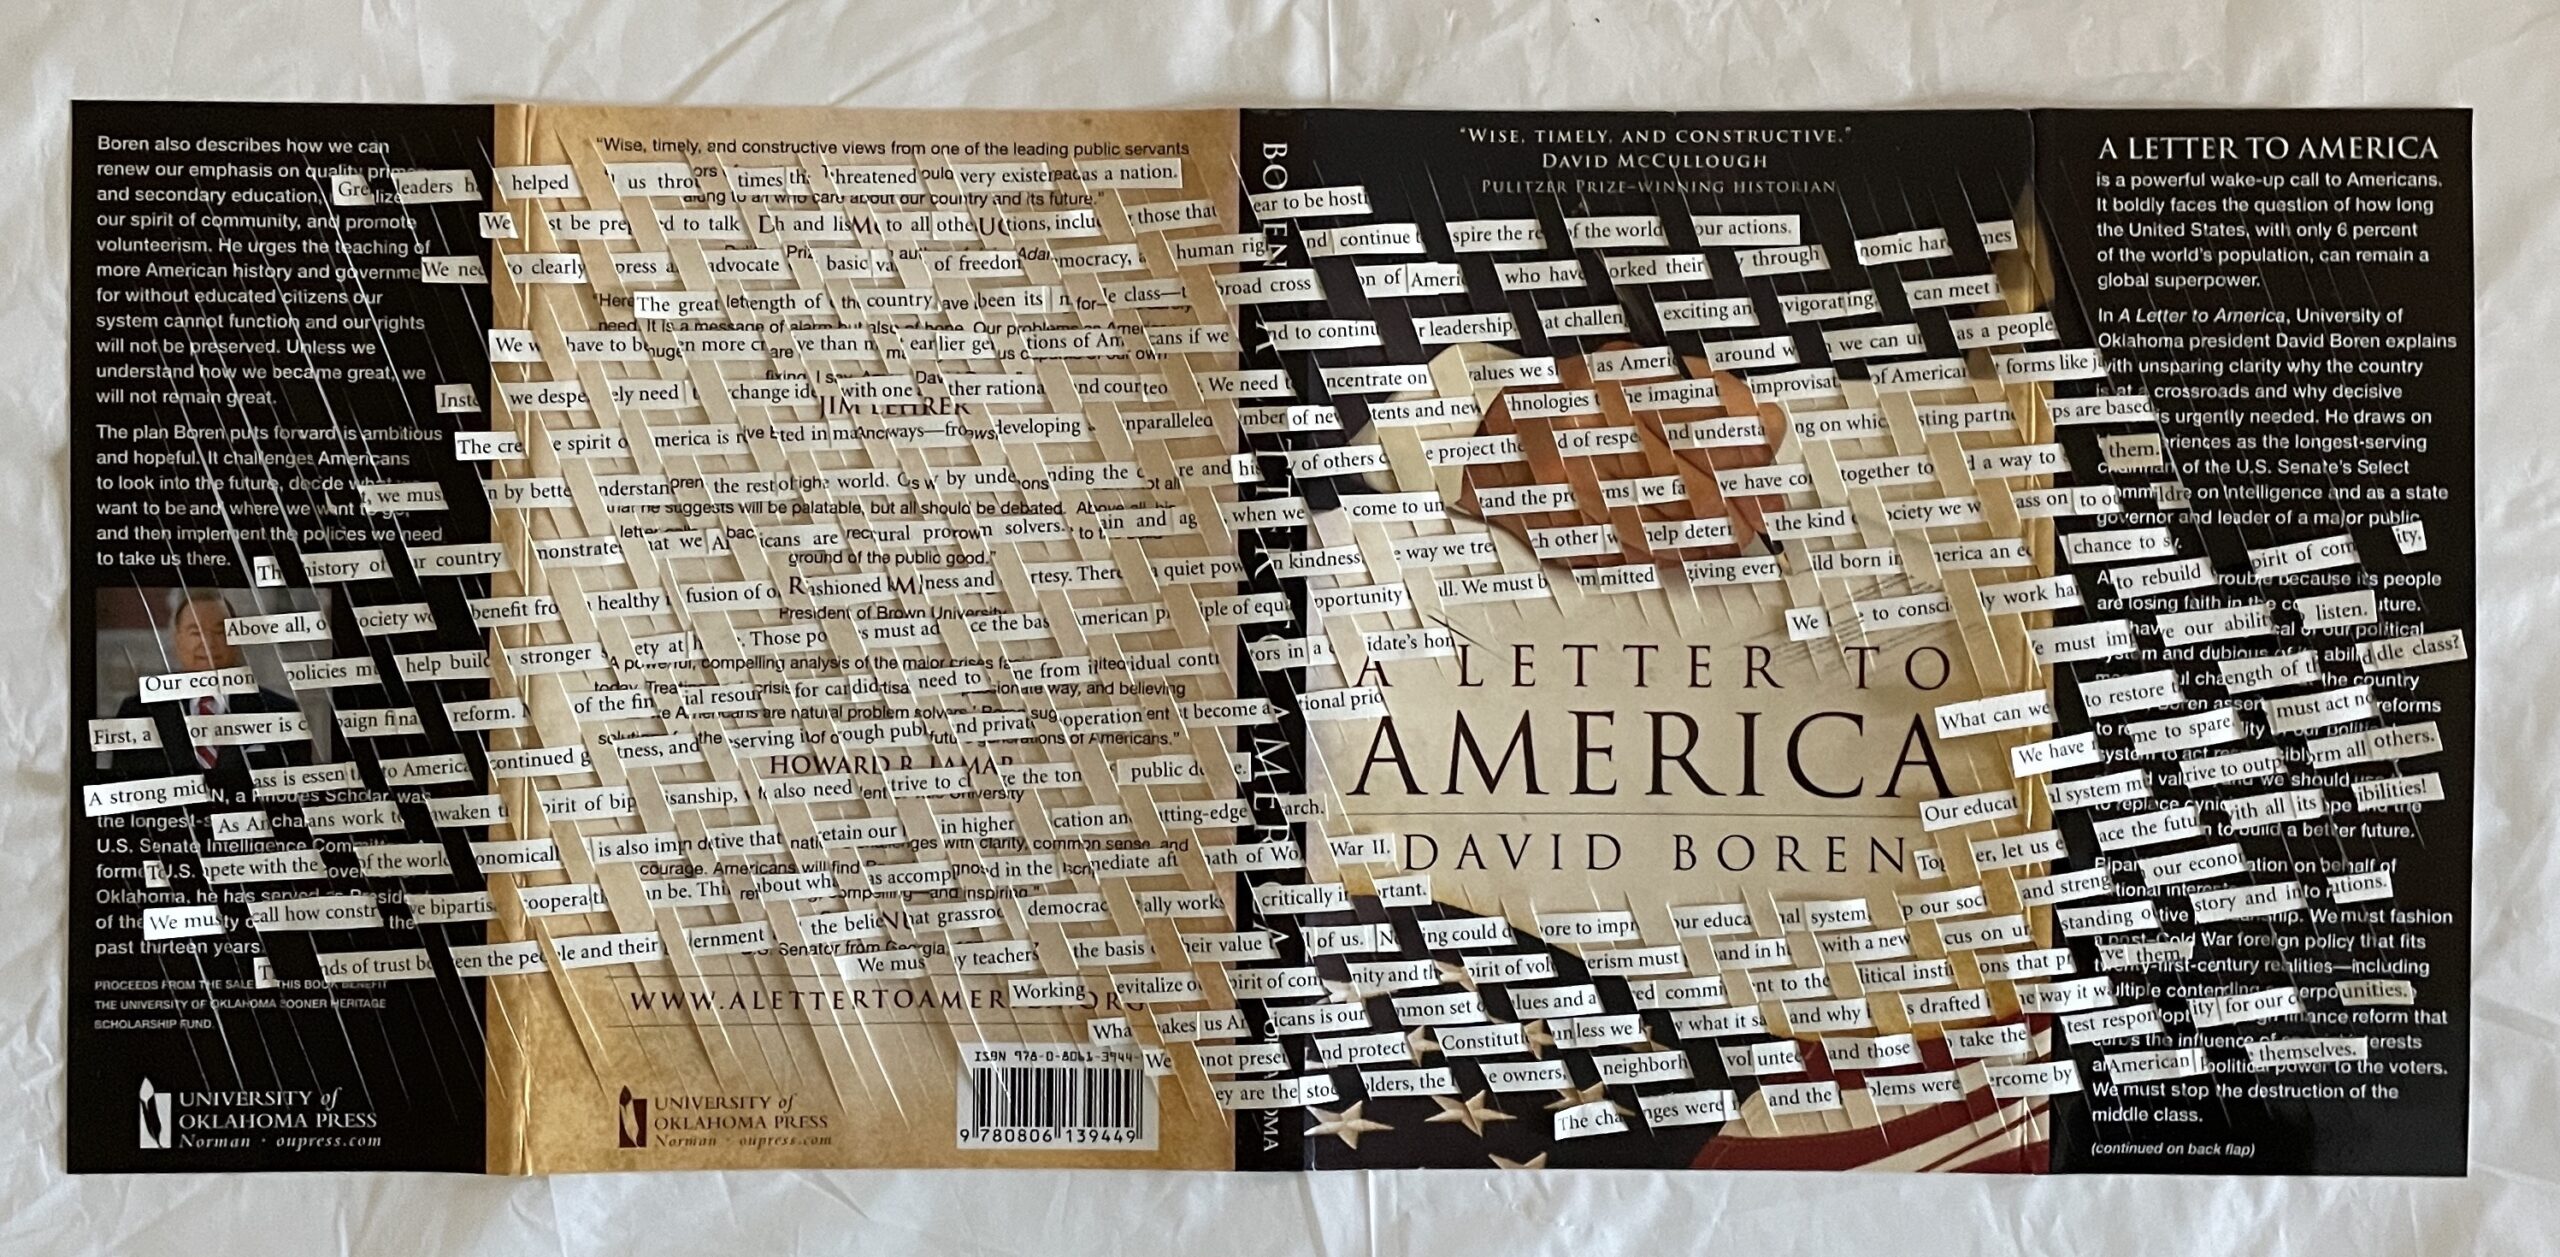 This is an artwork by Maggie Kerrigan that weaves text from the book, A Letter to American into the dust jacket of the book.